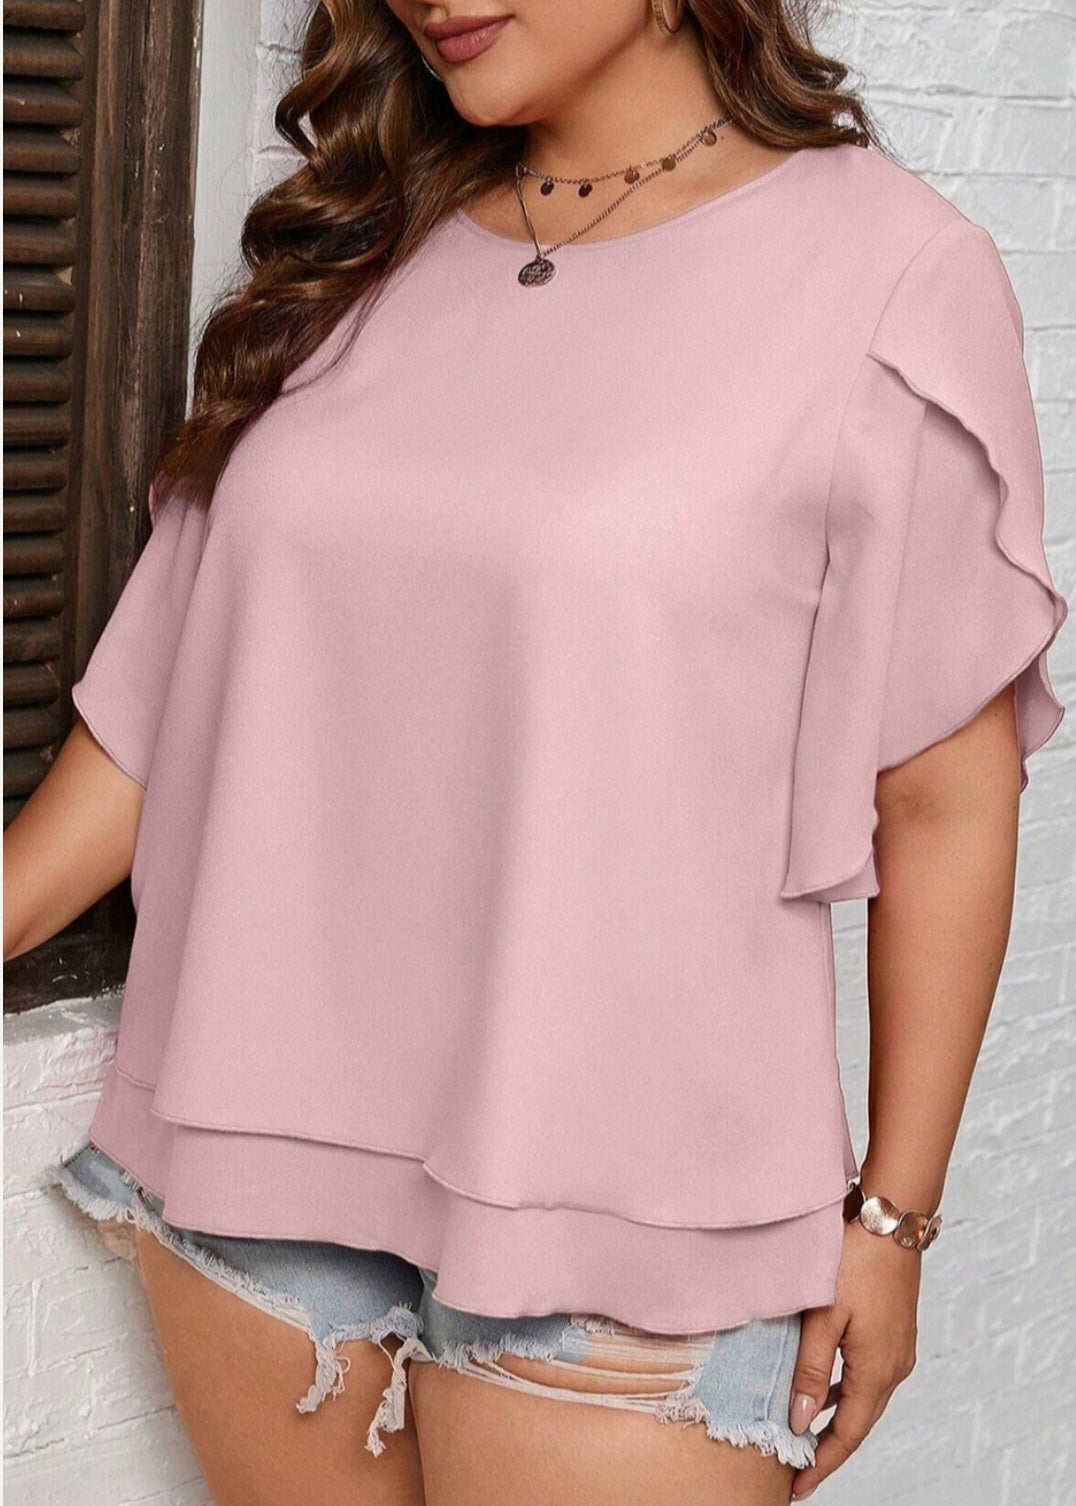 Plus Astrid pink layer blouse